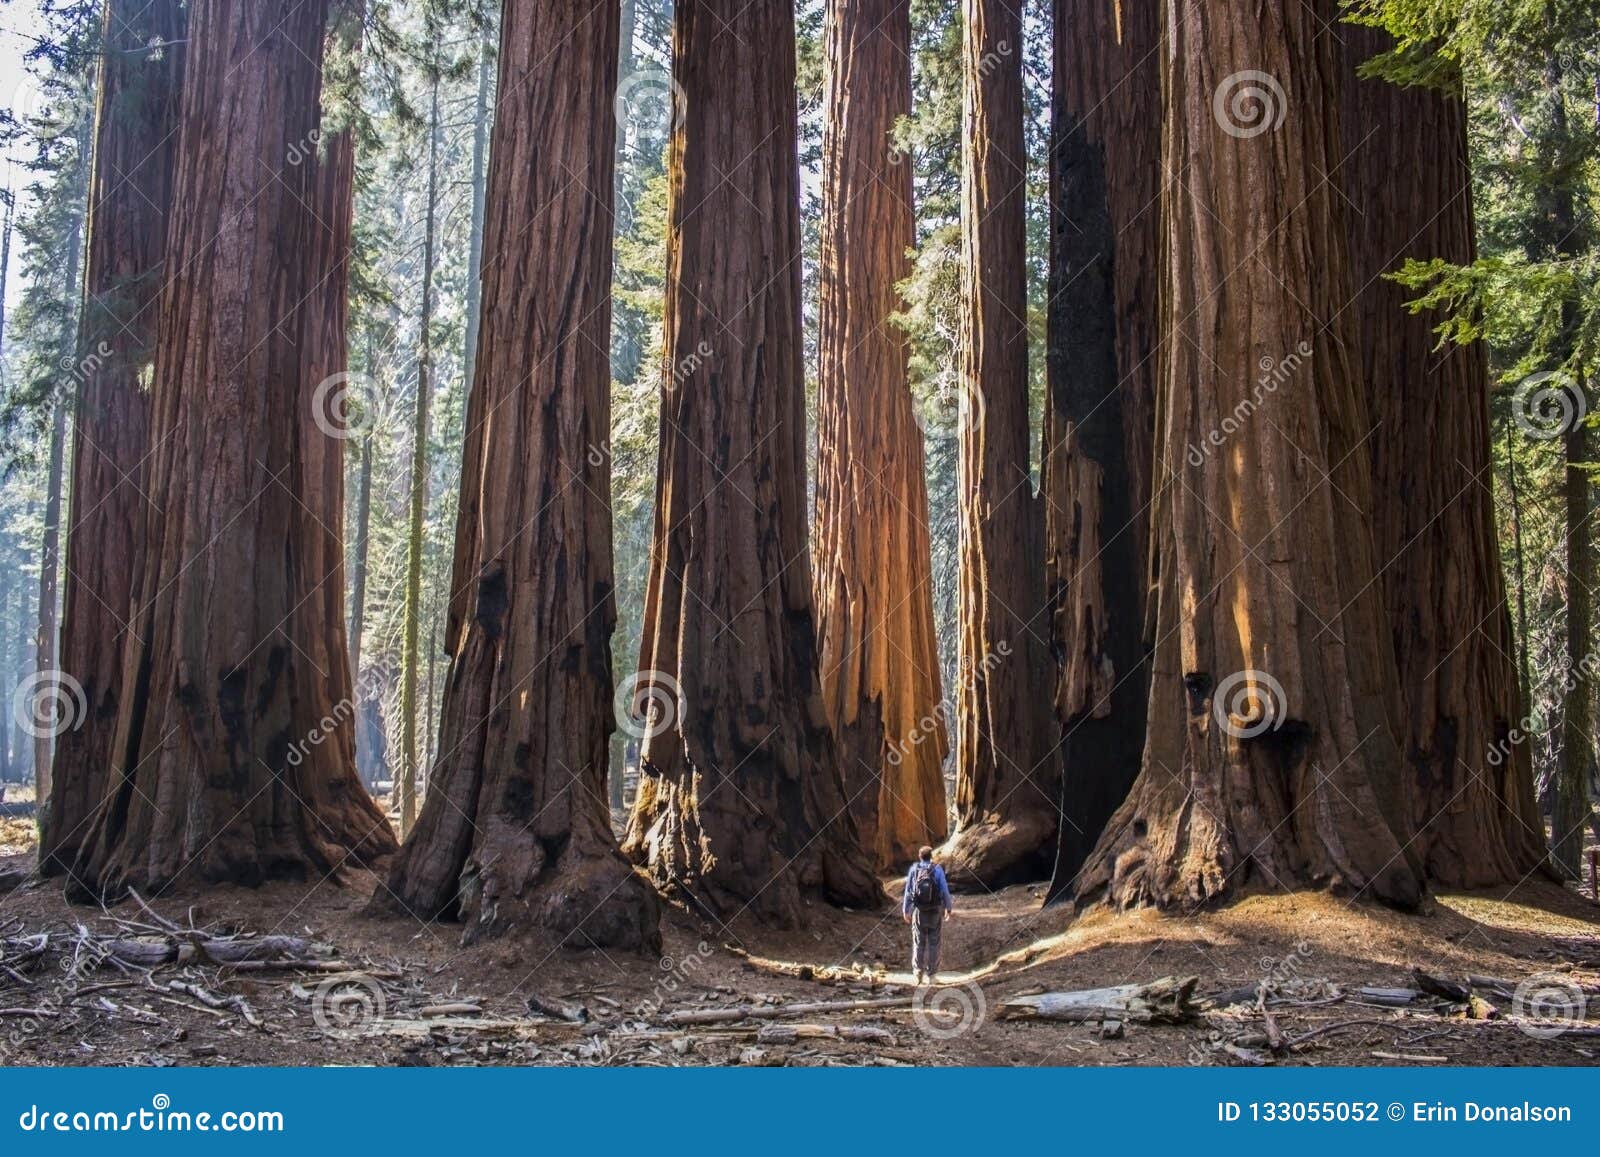 single man with huge grove of giant sequoia redwood trees in cal